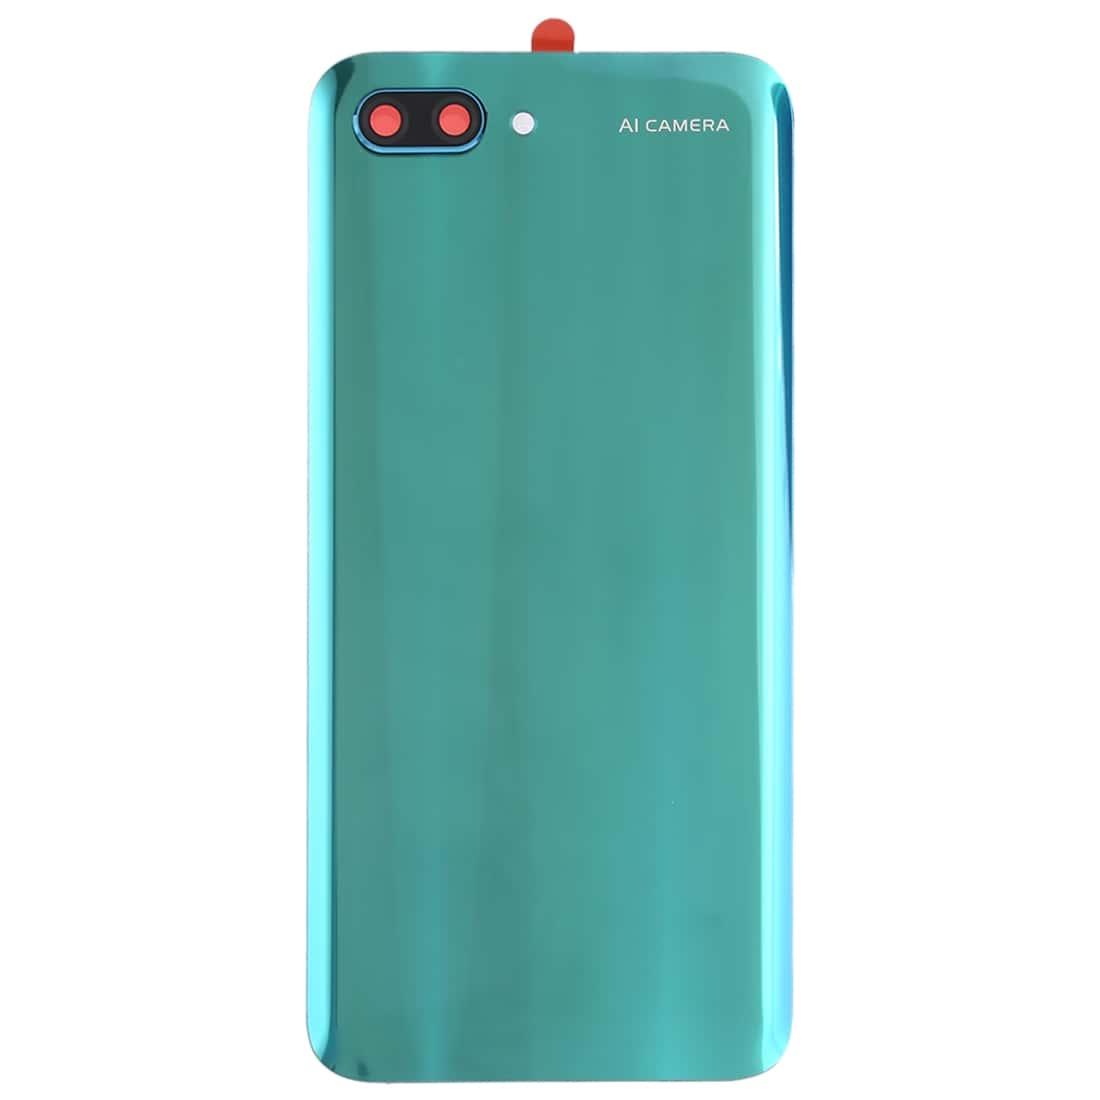 Back Glass Panel for Huawei Honor 10 Green with Camera Lens